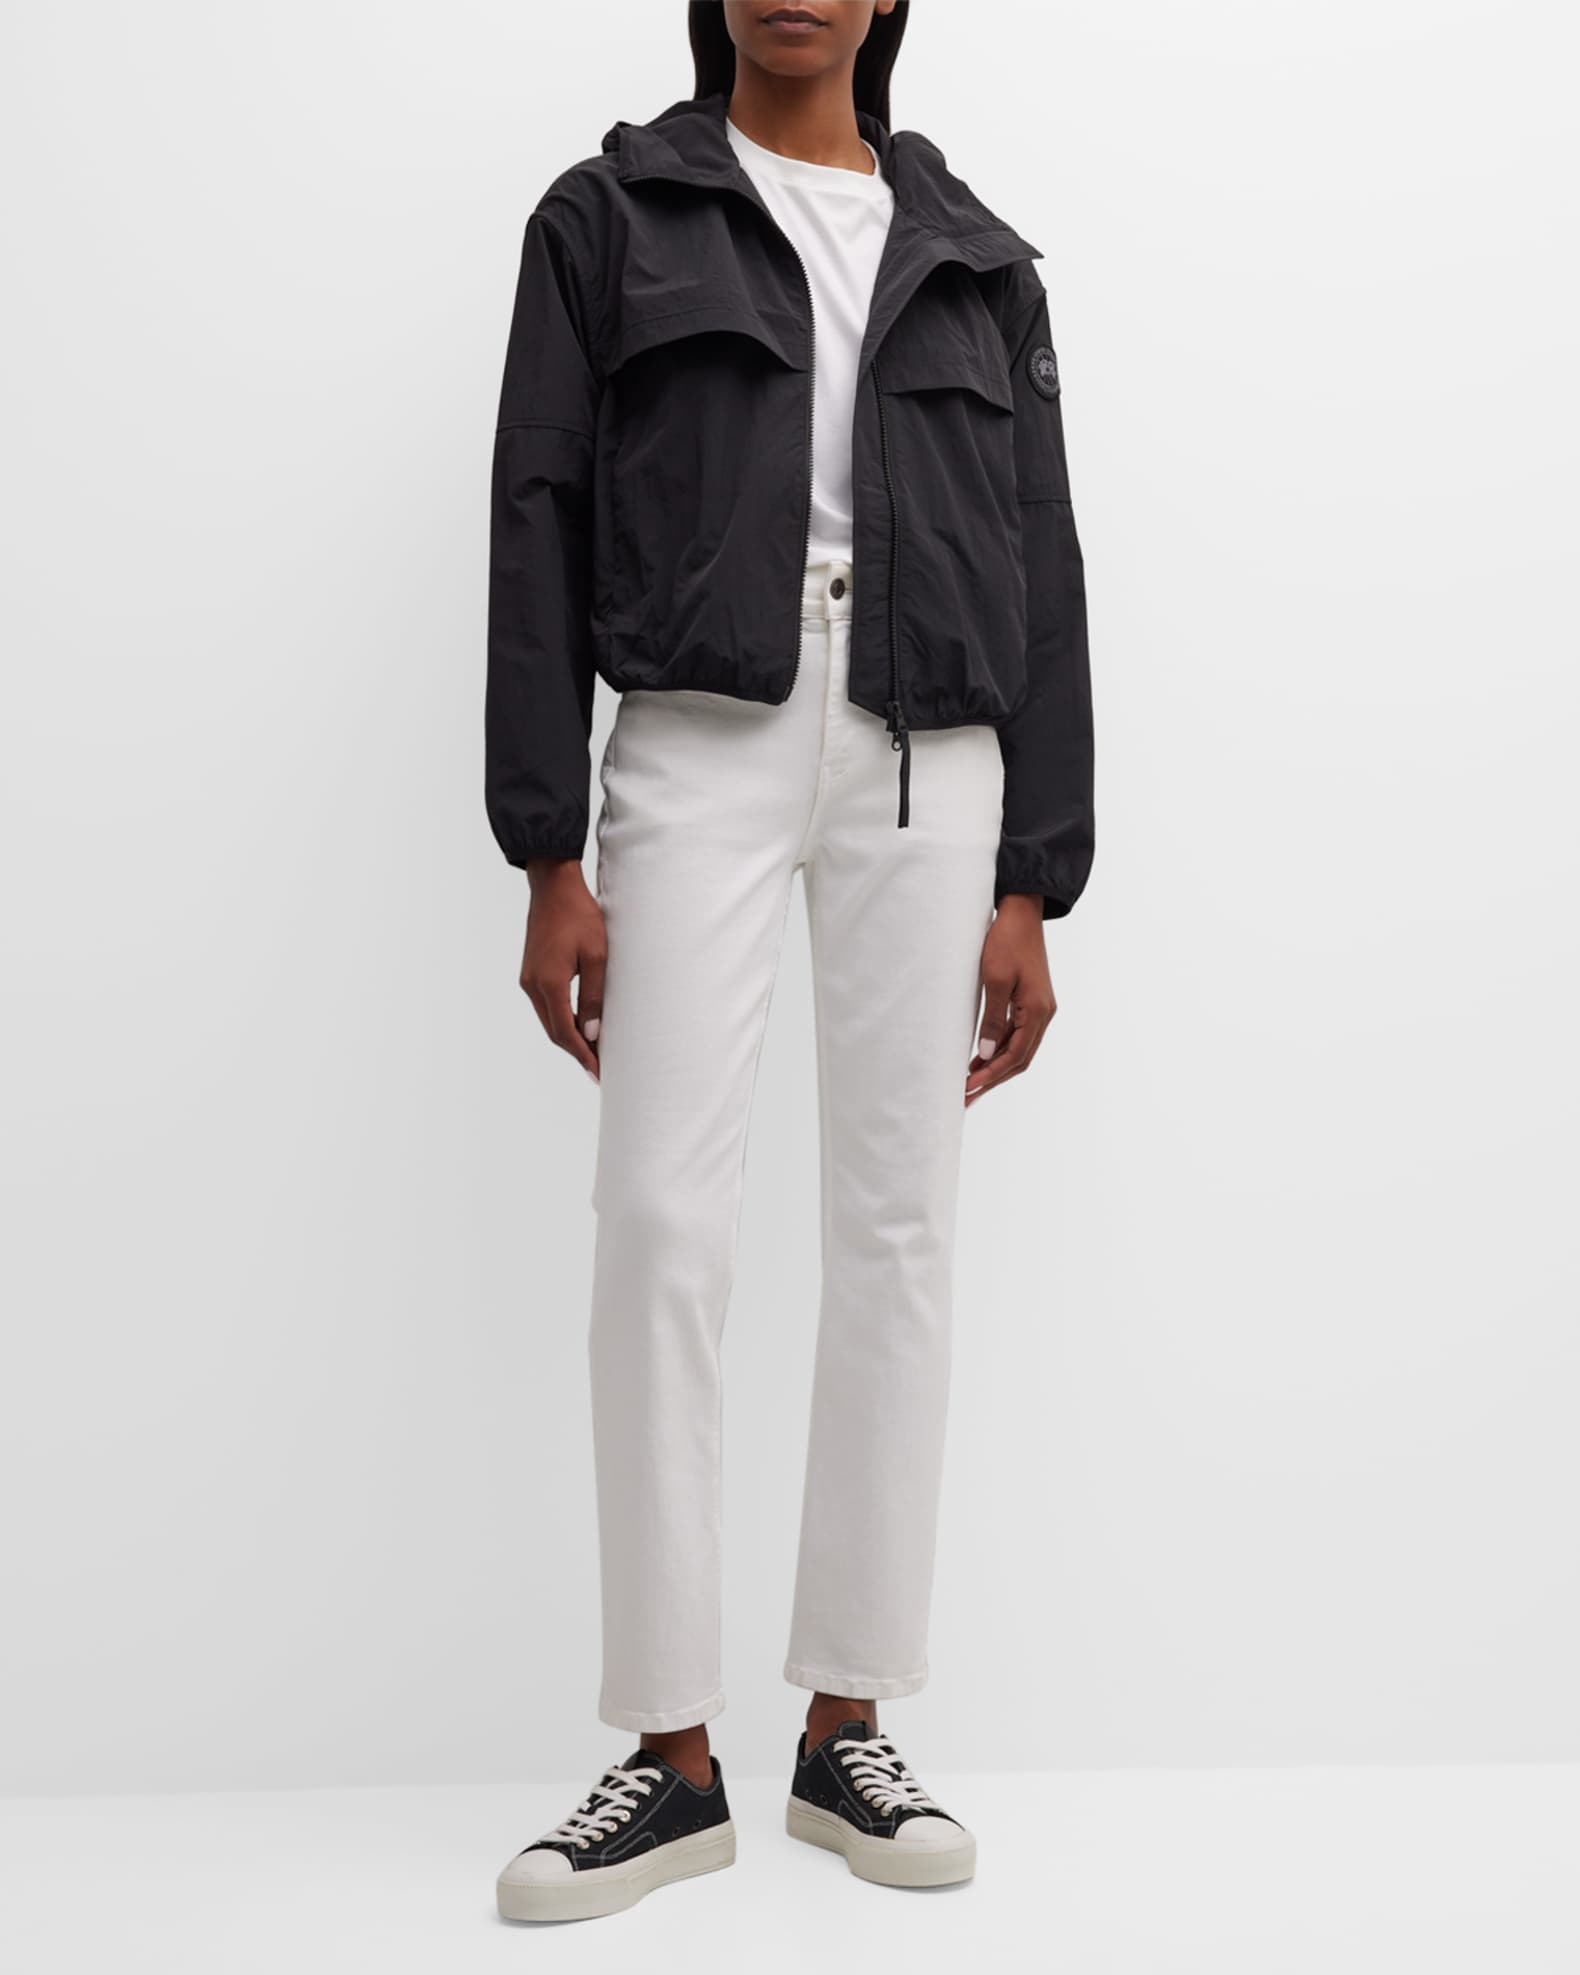 Canada Goose Sinclair Hooded Jacket with Mesh Vent | Neiman Marcus